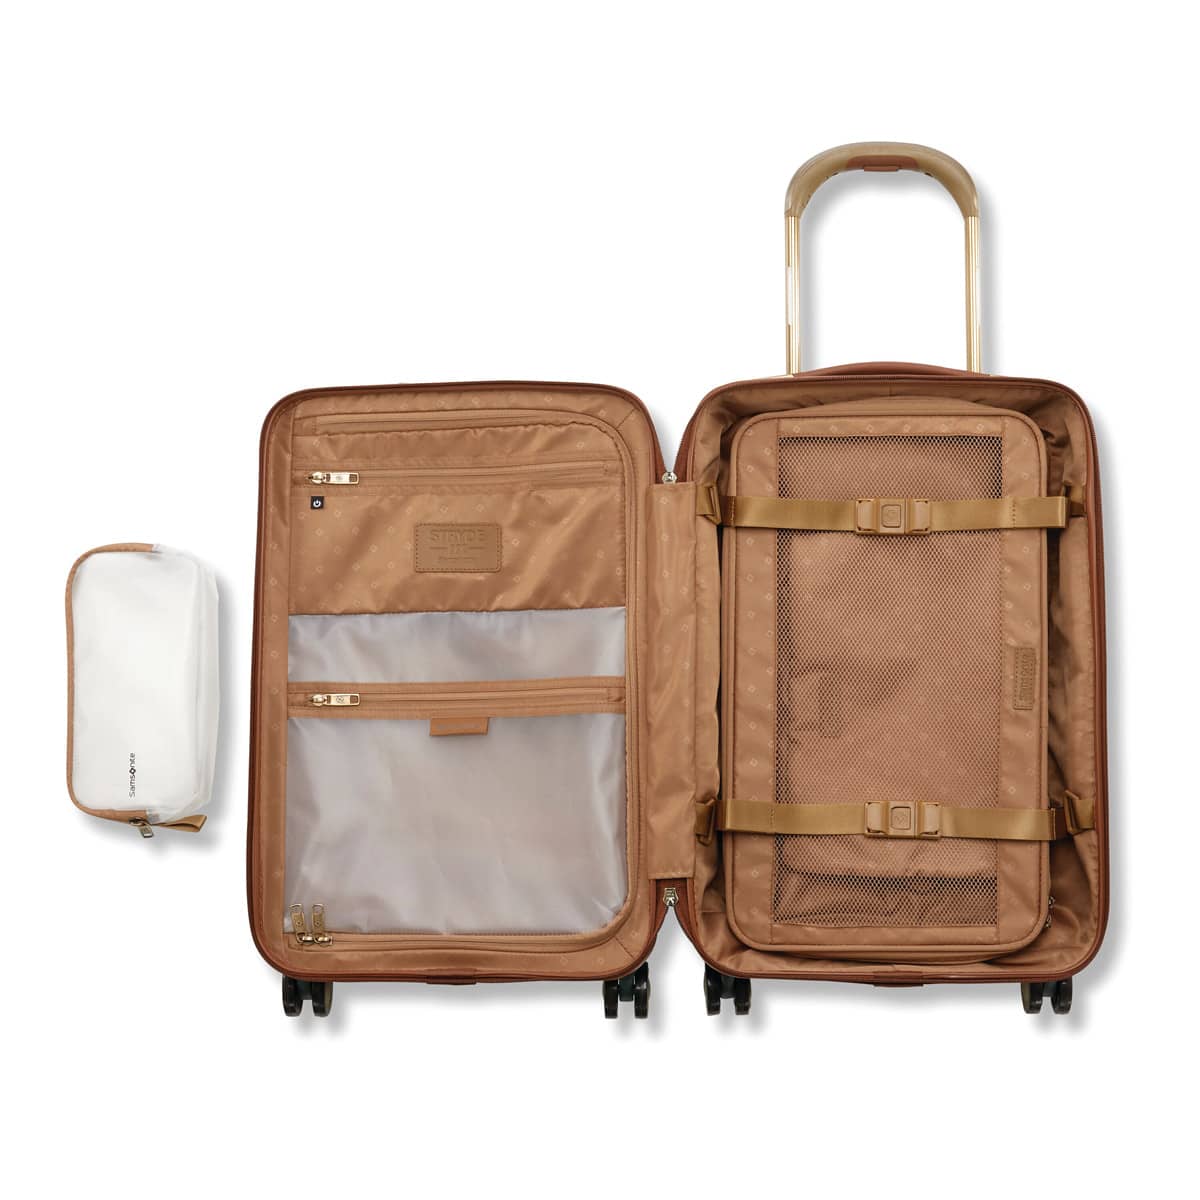 Best Carry-On Luggage for Business Travel